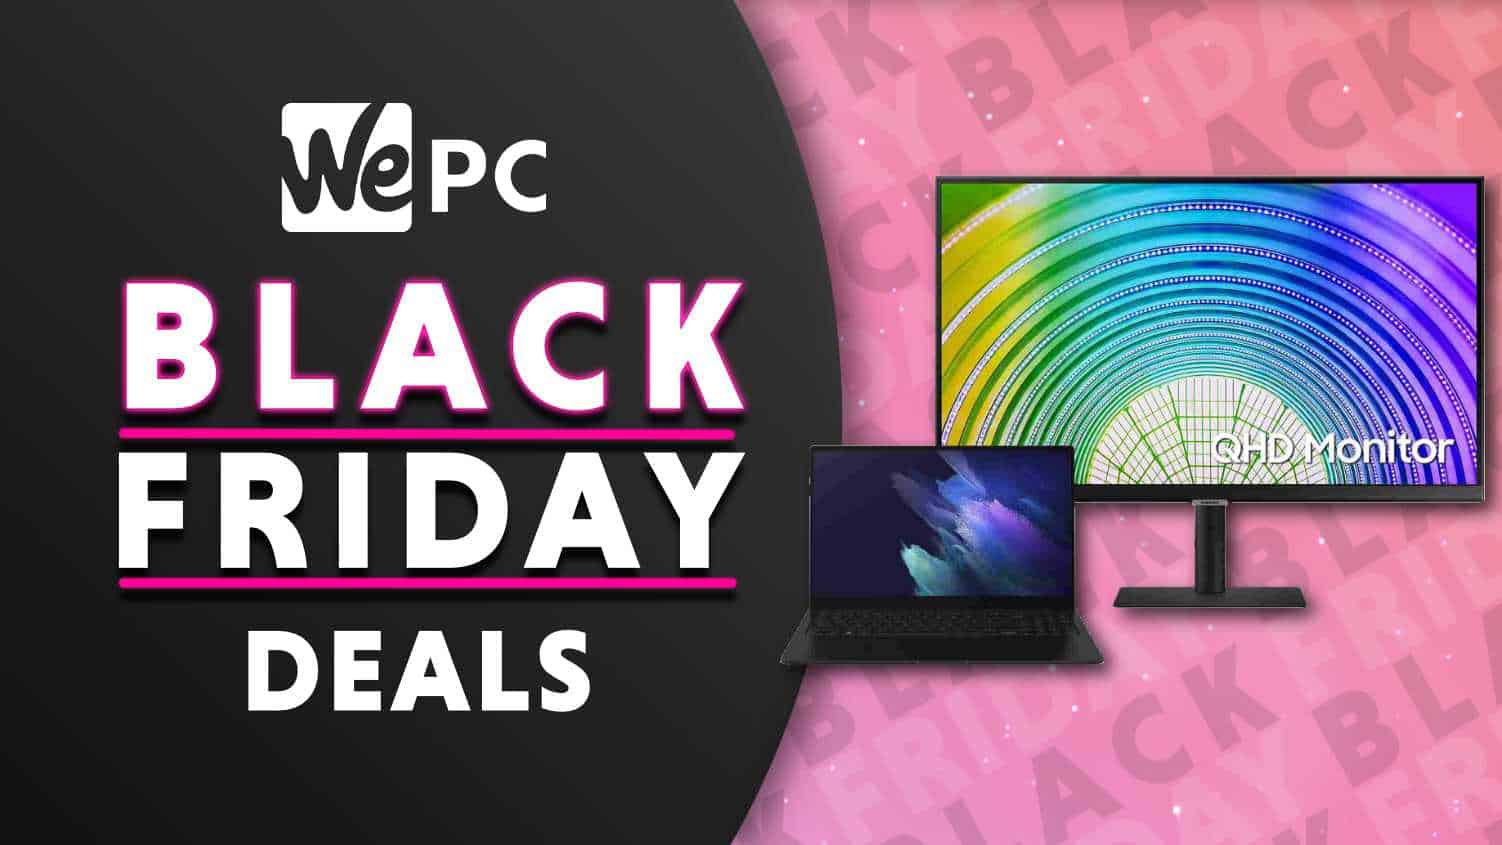 Get 13% off Galaxy Book and monitor early Black Friday 2021